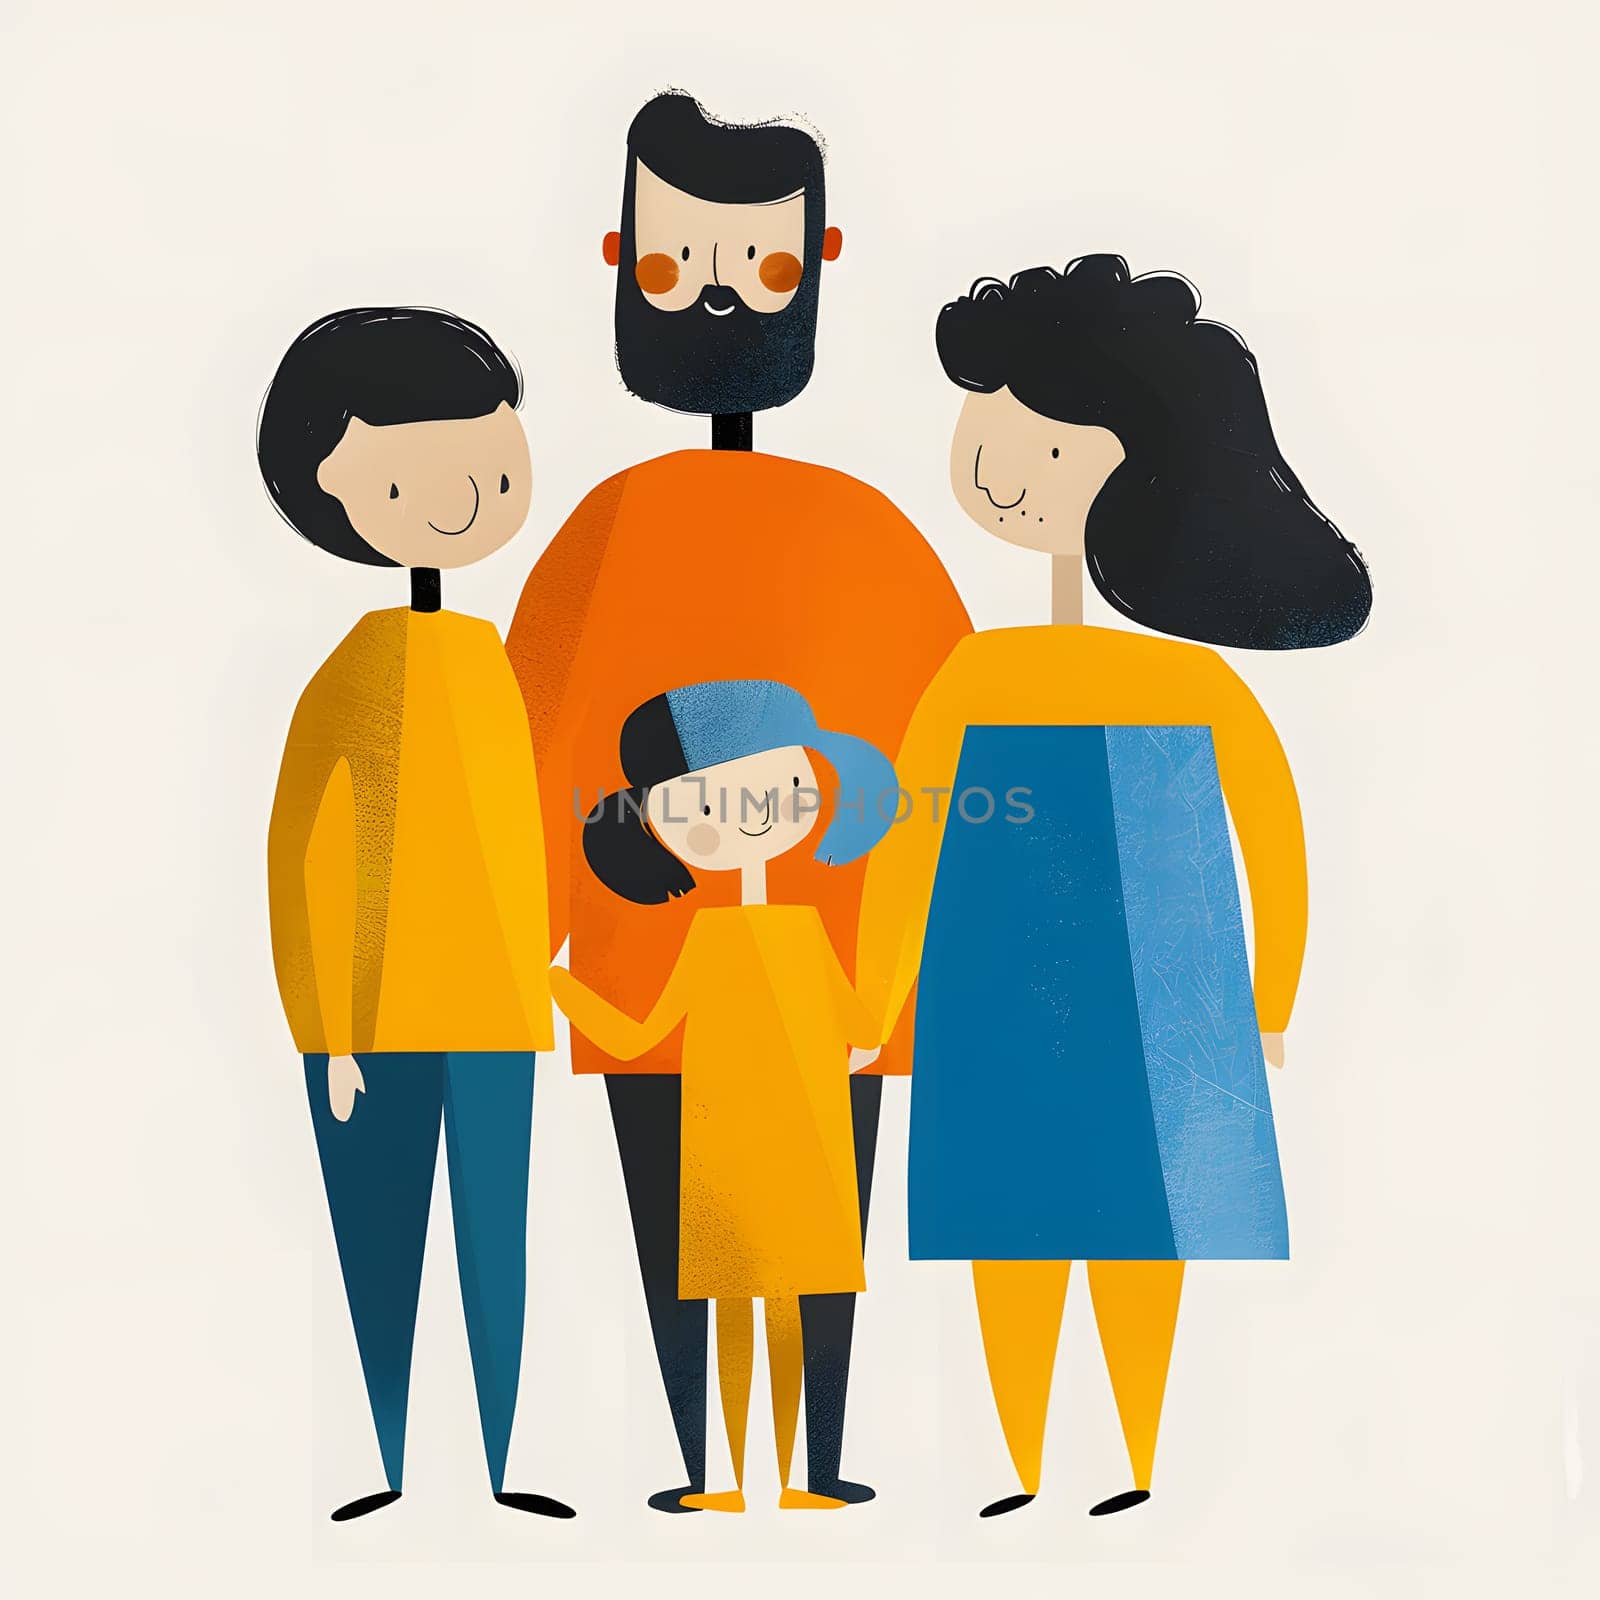 A cartoon illustration of a happy family standing next to each other, sharing smiles and making gestures. Each family member is a fictional character on a tshirt with animated cartoon art style